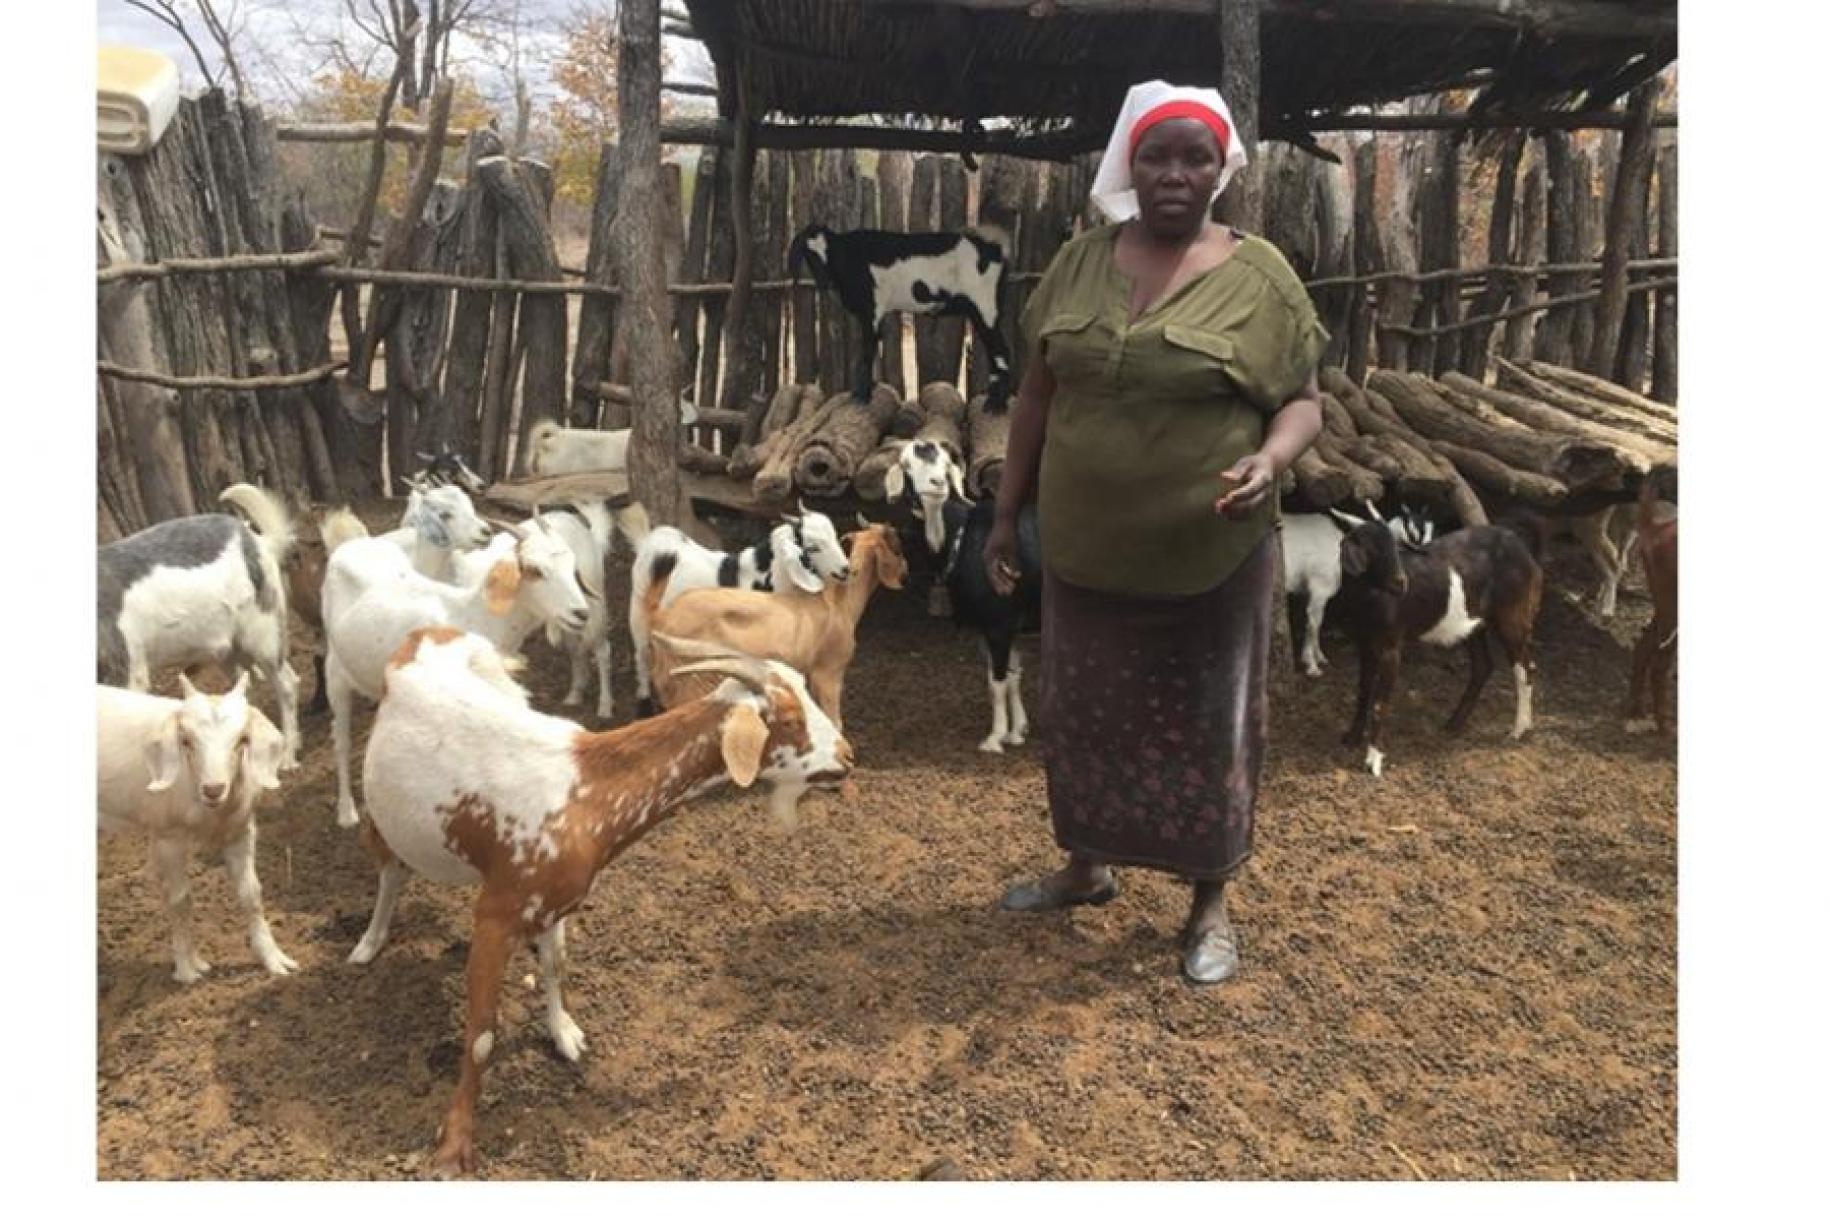 A female farmer stands outside surrounded by goats.